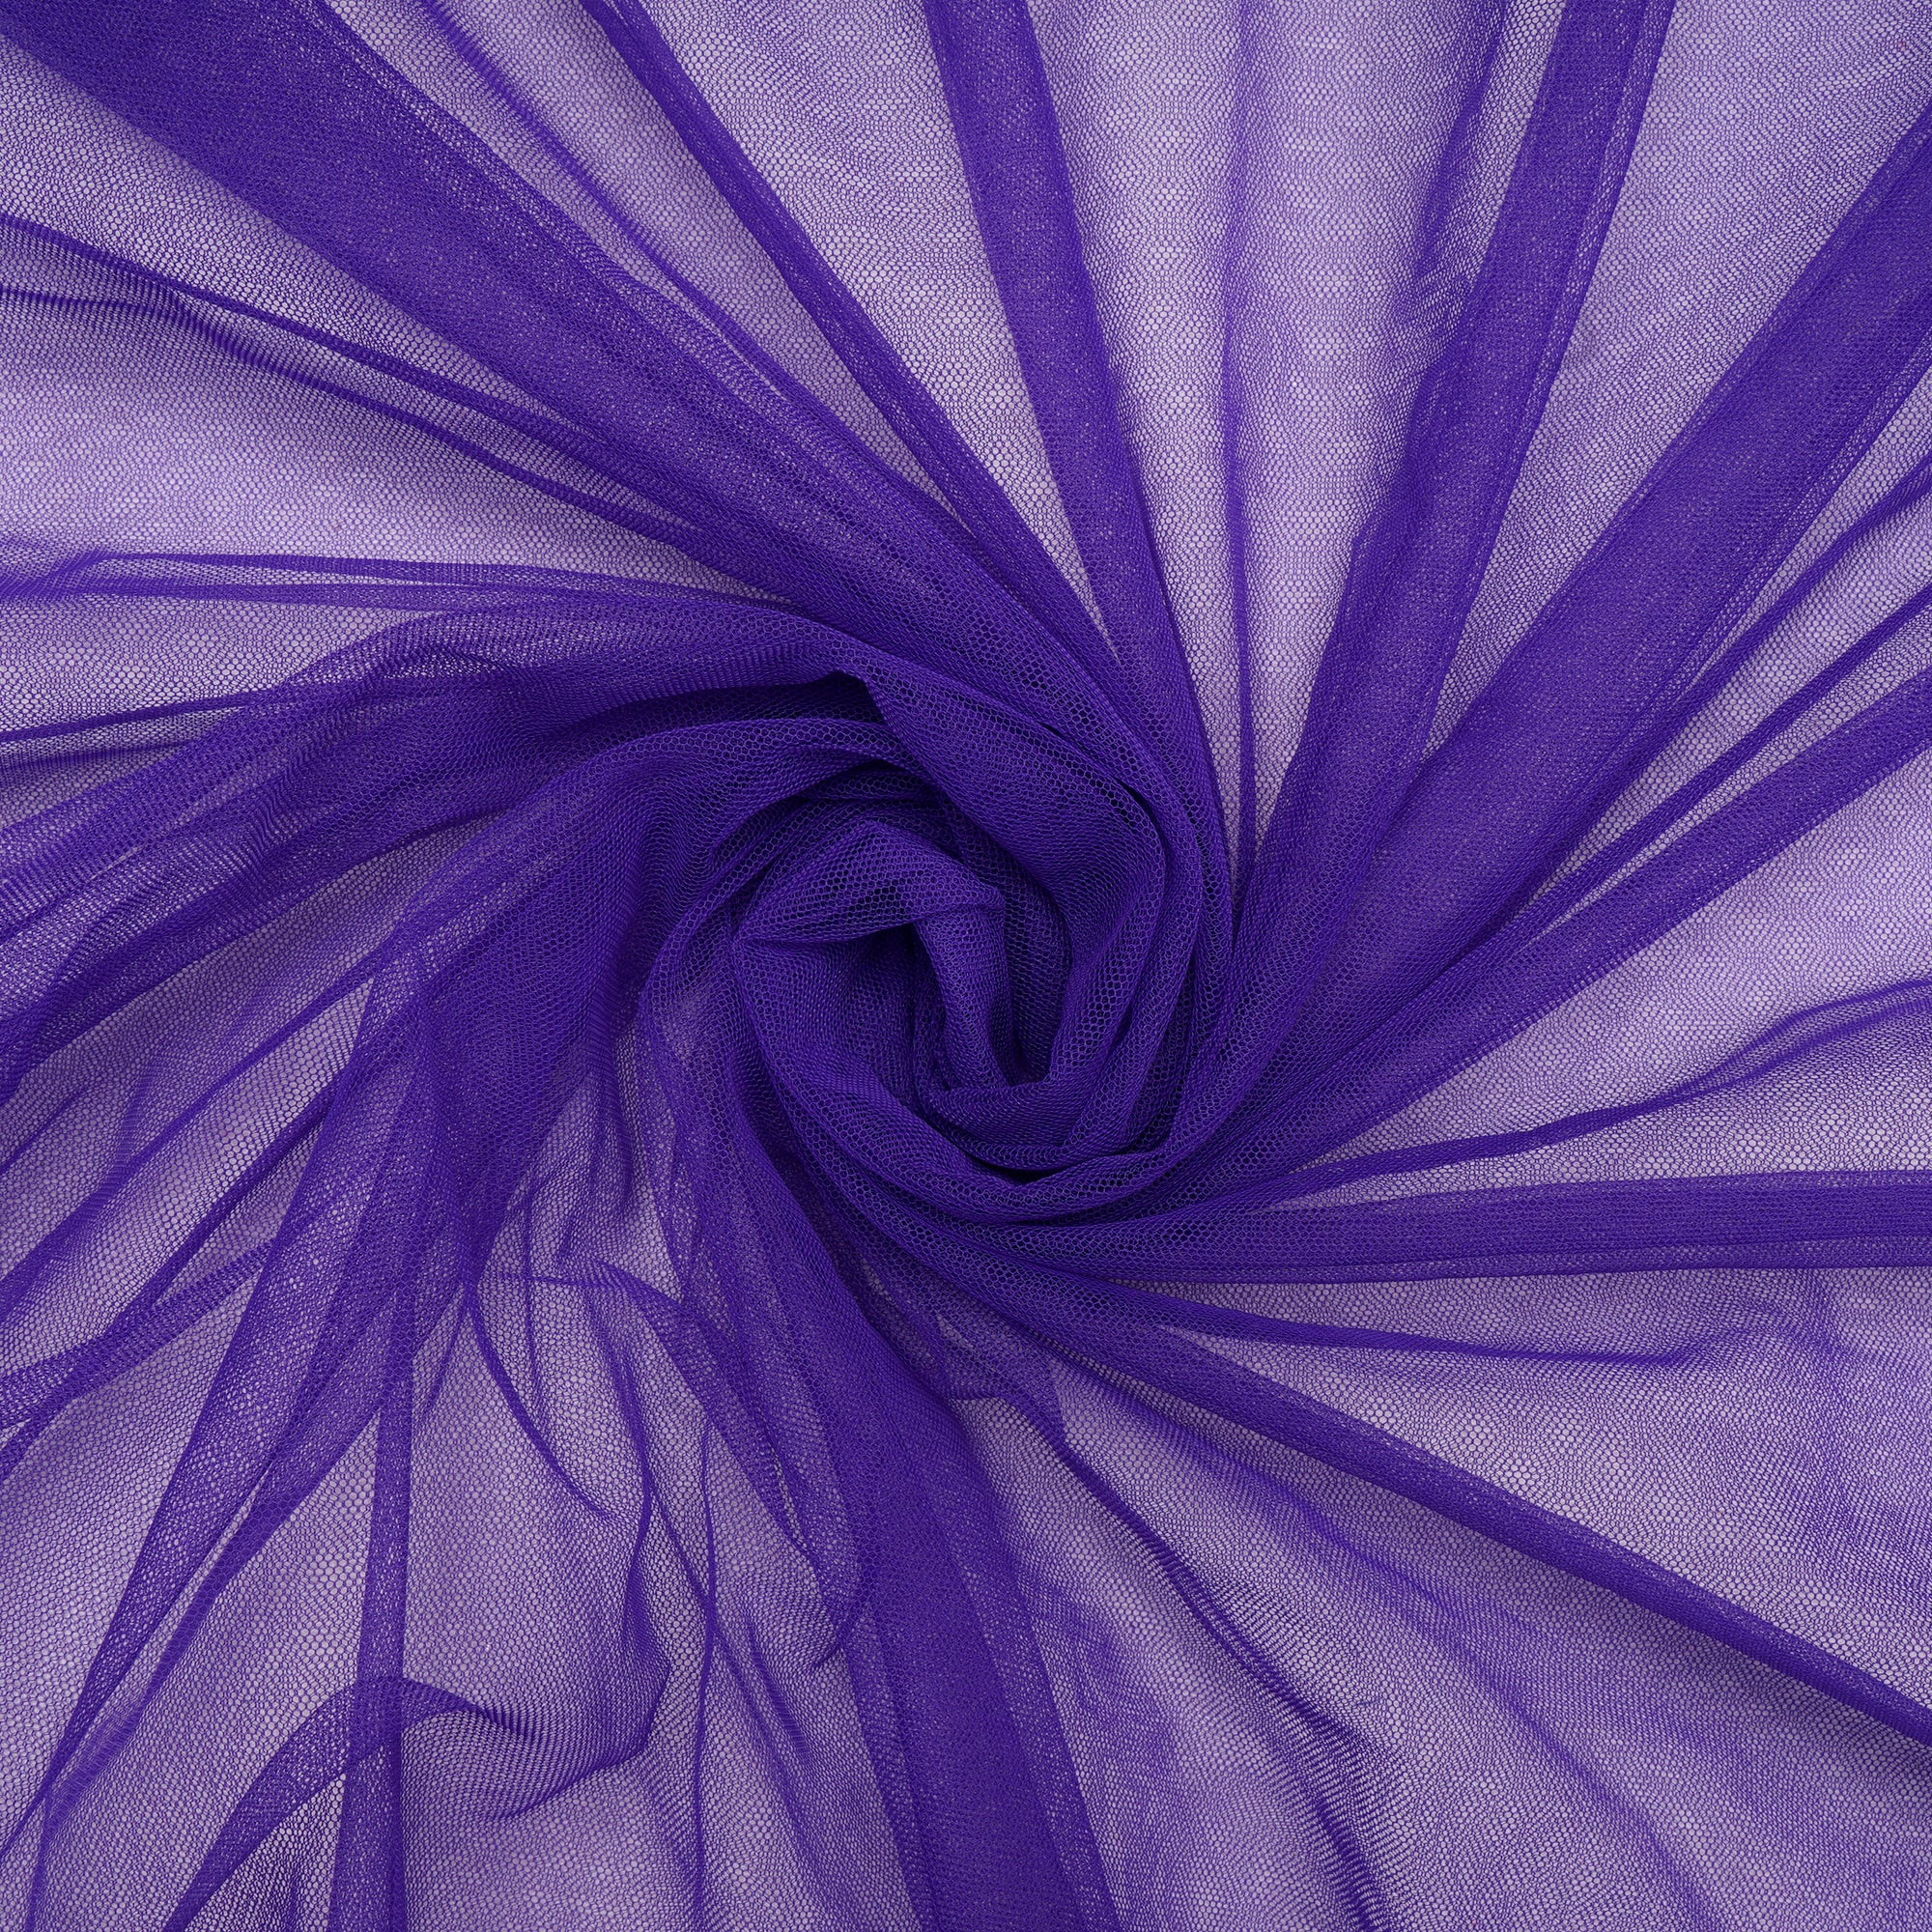 Violet Color Nylon Butterfly Net Fabric